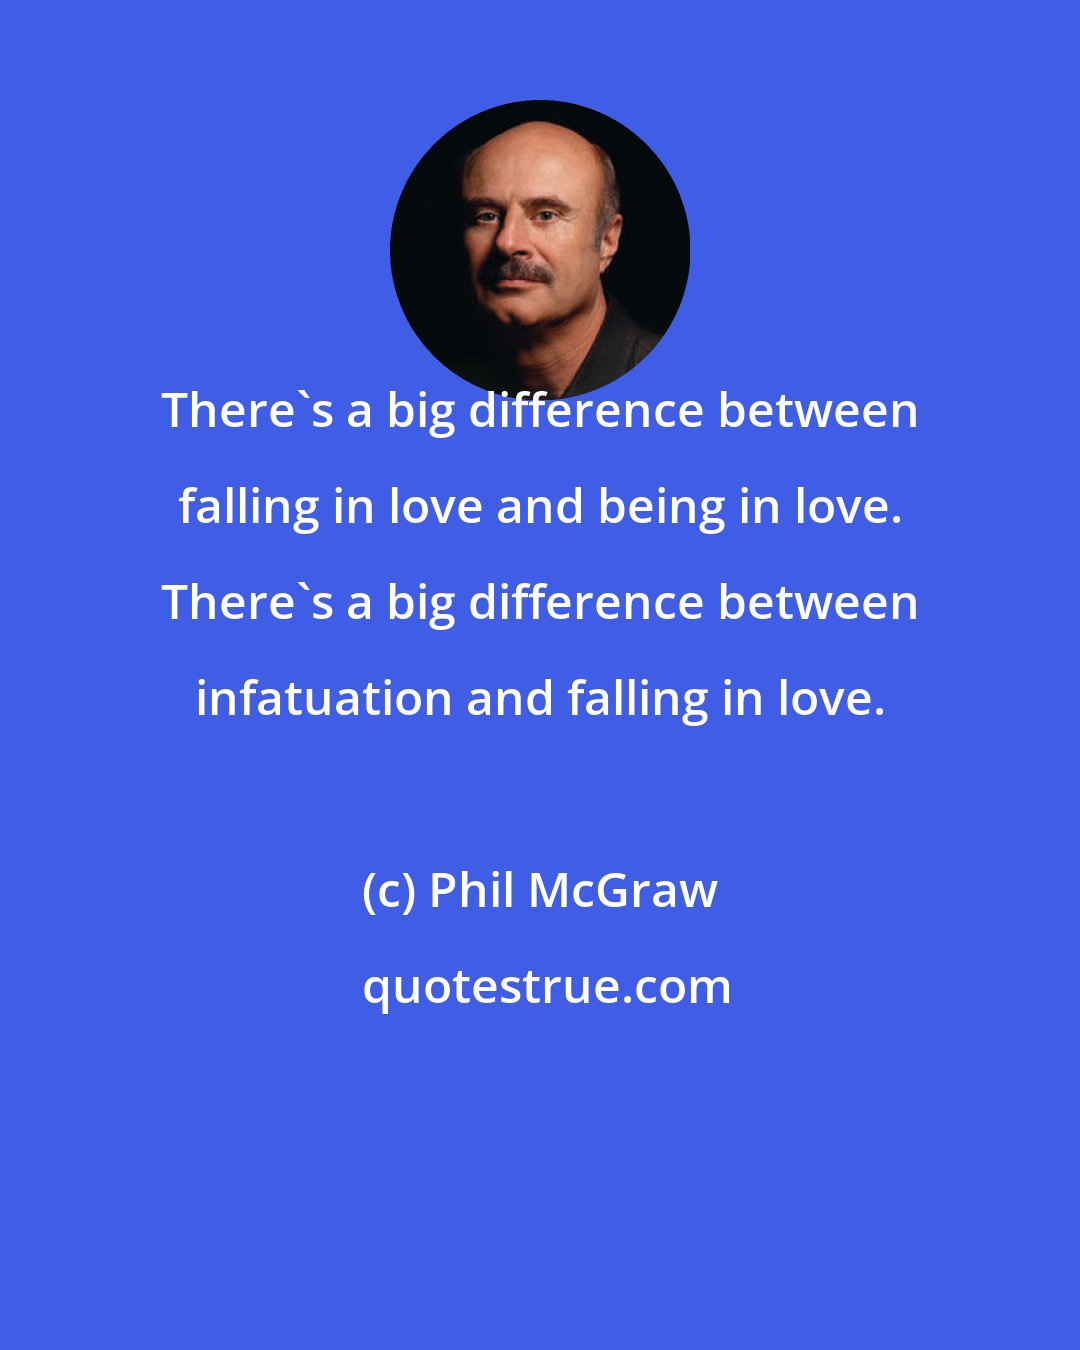 Phil McGraw: There's a big difference between falling in love and being in love. There's a big difference between infatuation and falling in love.